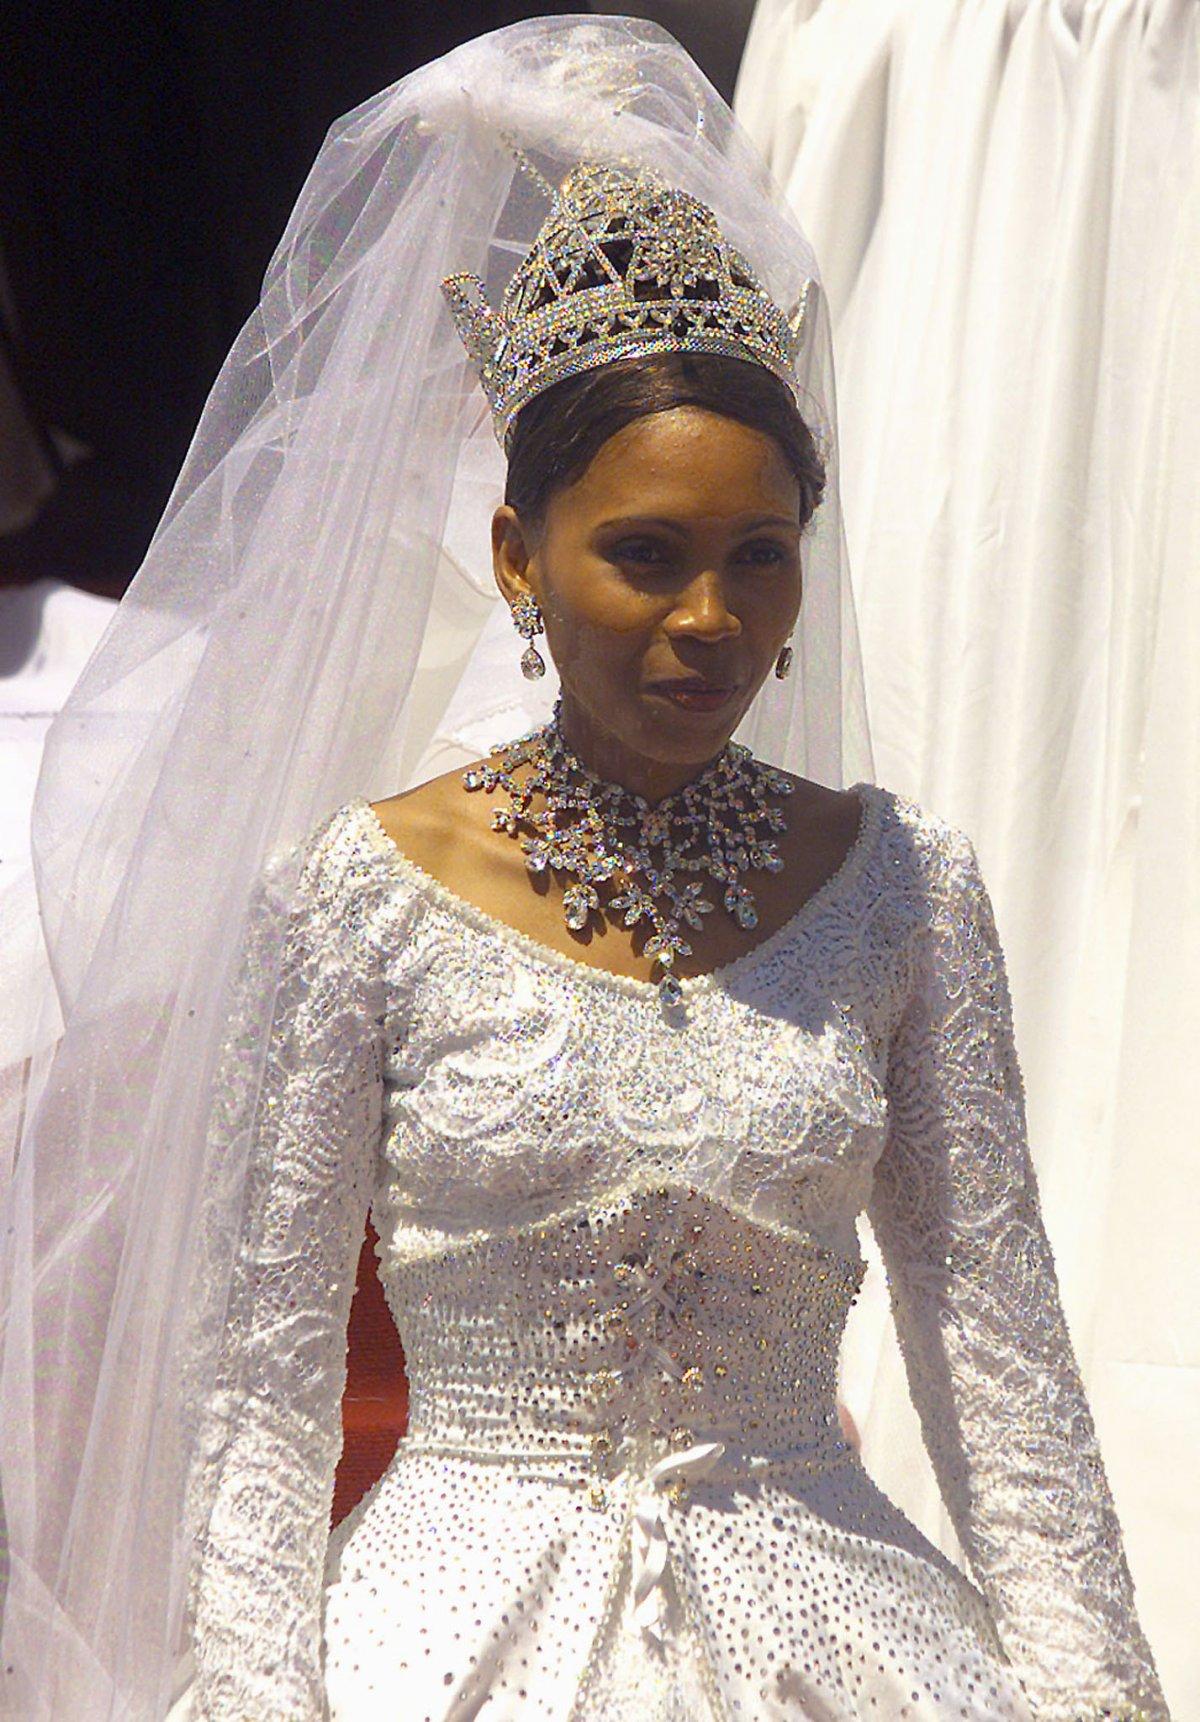 The 23-year-old wife of the Lesotho King Letsie III, Karabo Motsoeneng, leaves the Royal Wedding ceremony at the Lesotho Independent stadium in Maseru in 2000.